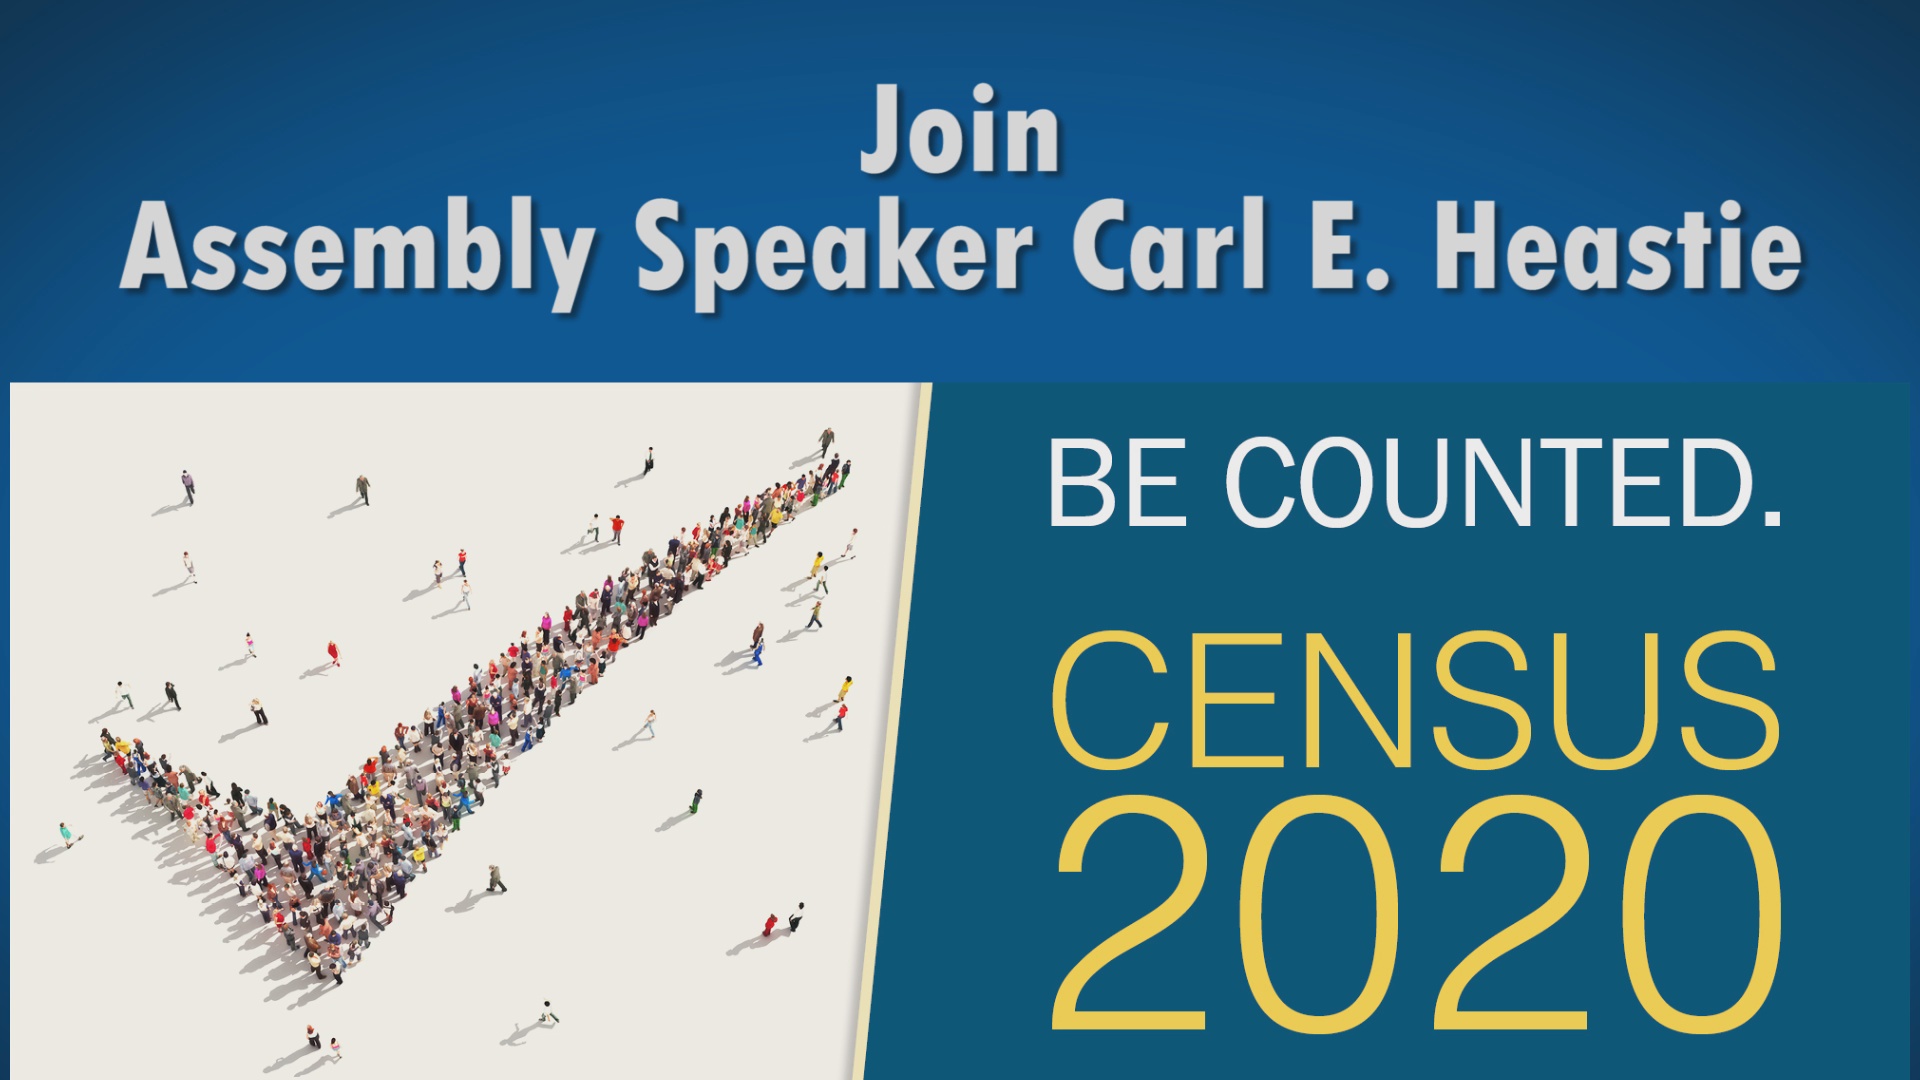 Census 2020 - Be Counted